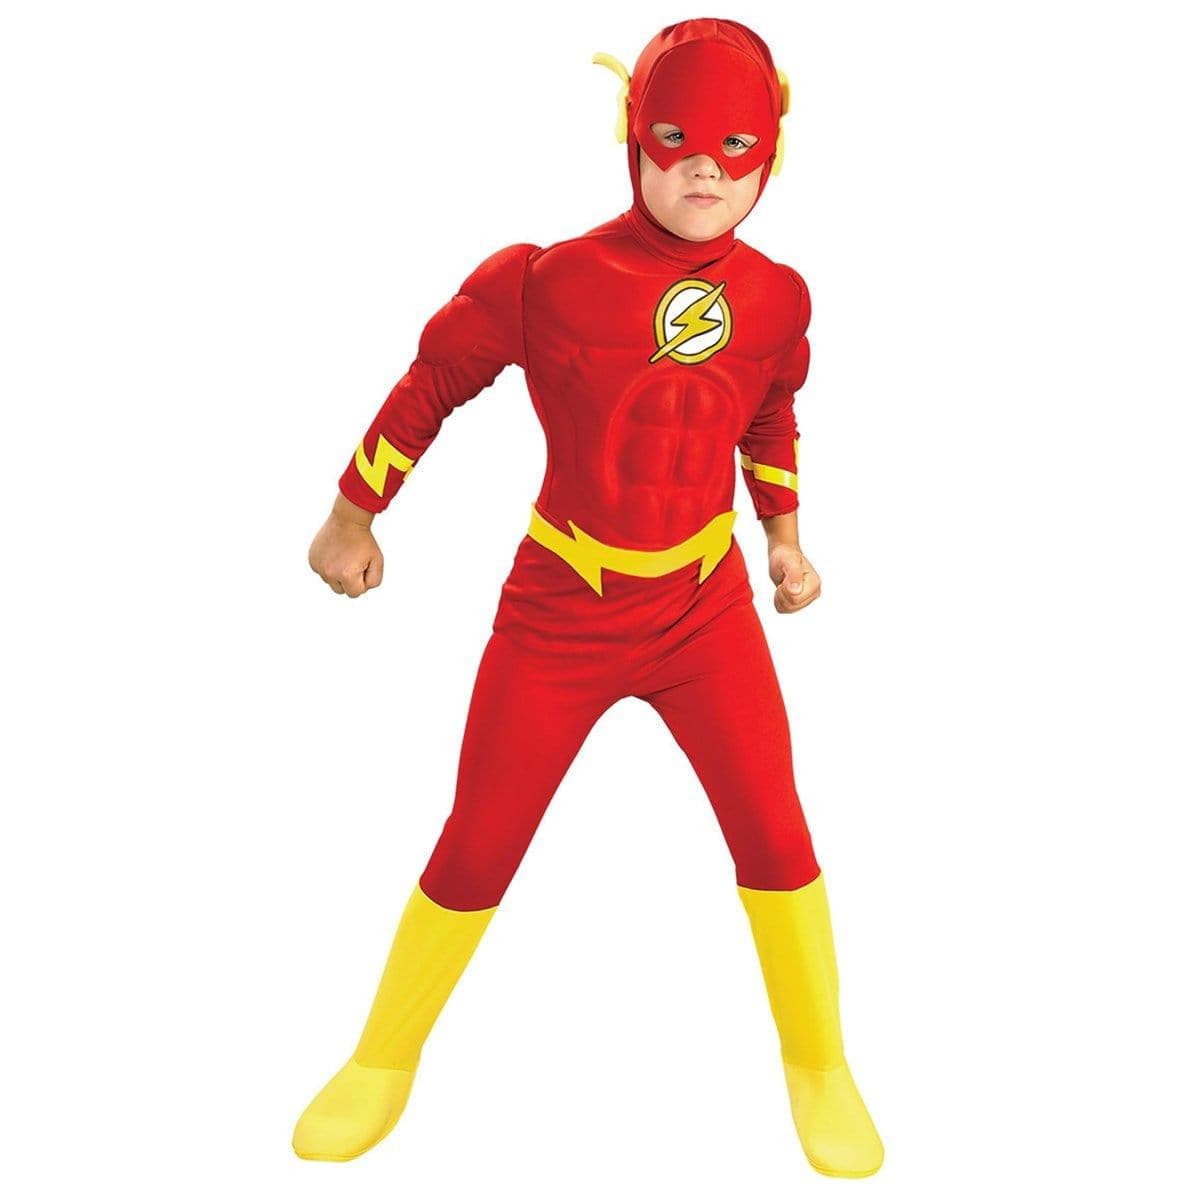 Buy Costumes The Flash Deluxe Muscle Costume for Kids, The Flash sold at Party Expert